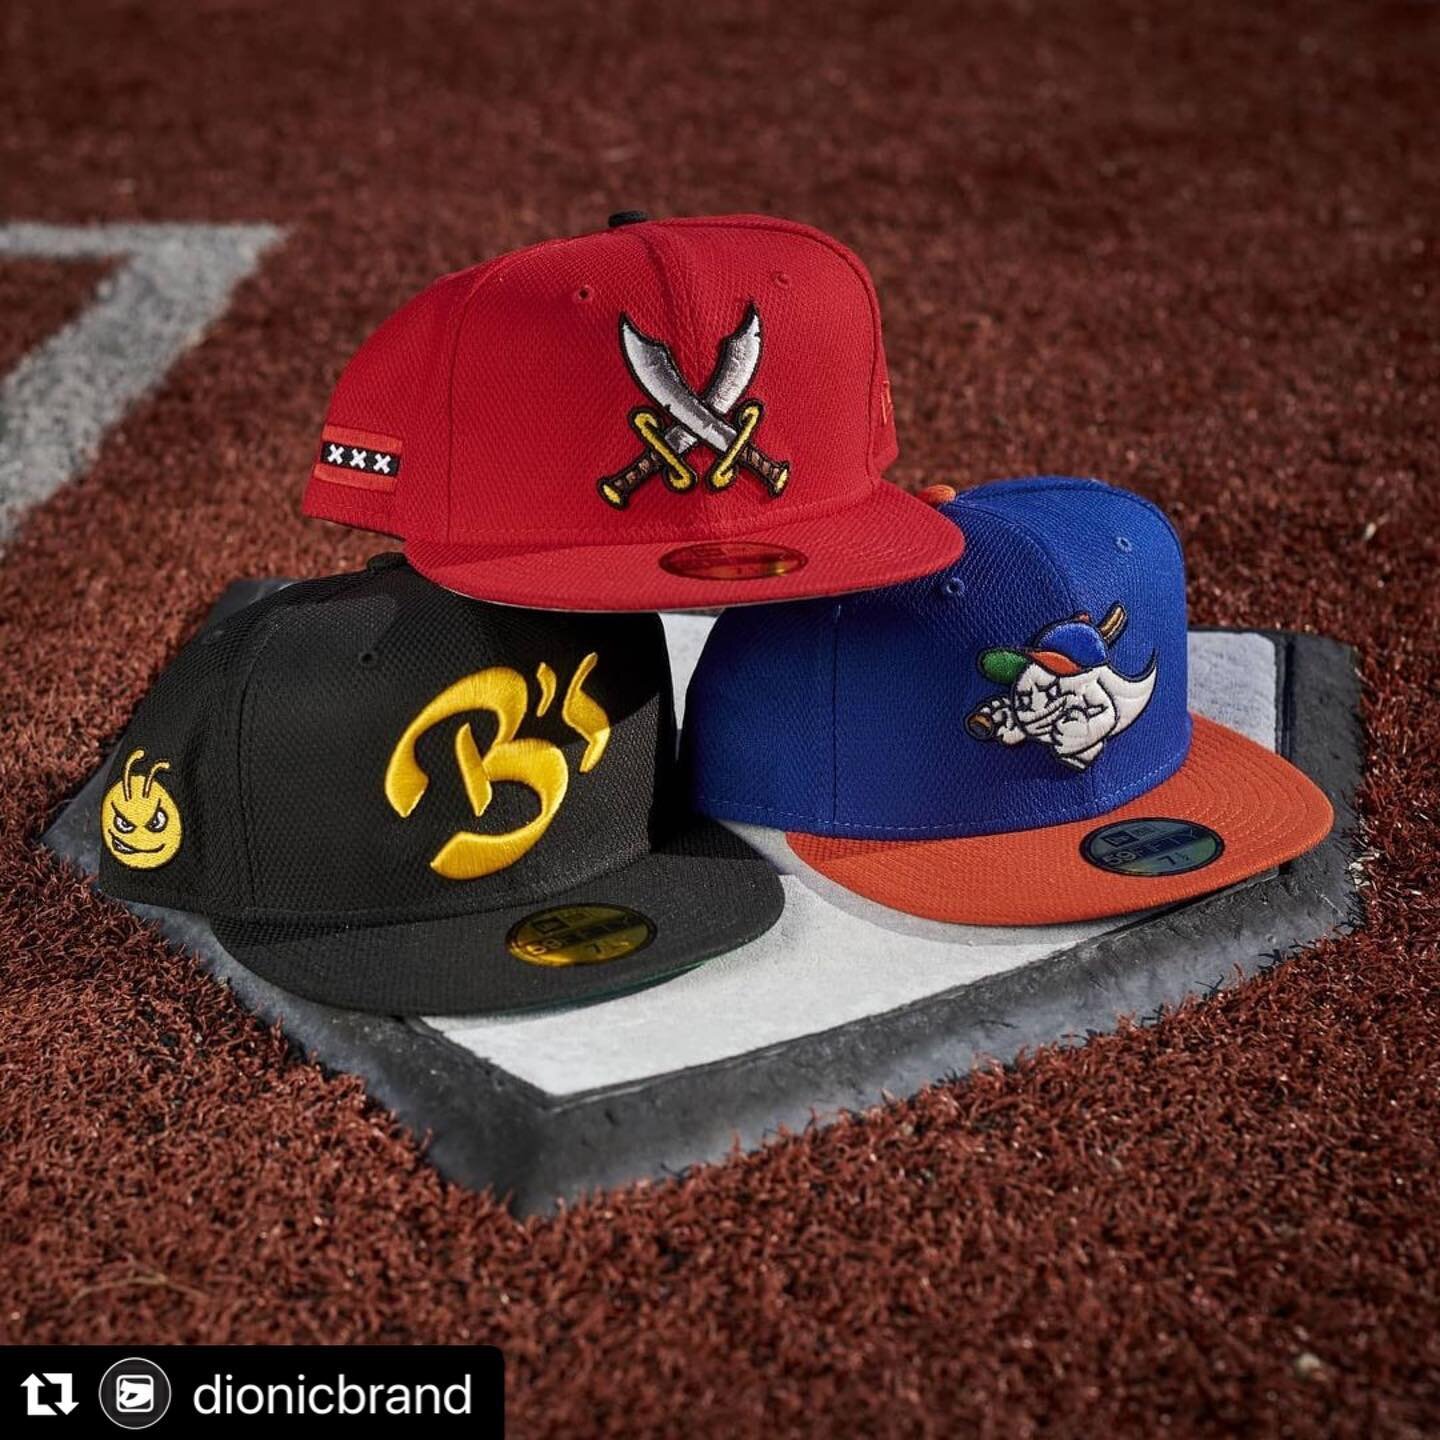 ⏭⏭⏭New Diamond era #SpringTraining #newera #5950 dropping @hatclub tomorrow for the next 3 tuesdays. Don&rsquo;t sleep on these epic high quality caps for the spring summer. Perfect ball cap for the stadium / hot weather @dionicbrand 
Spring Training